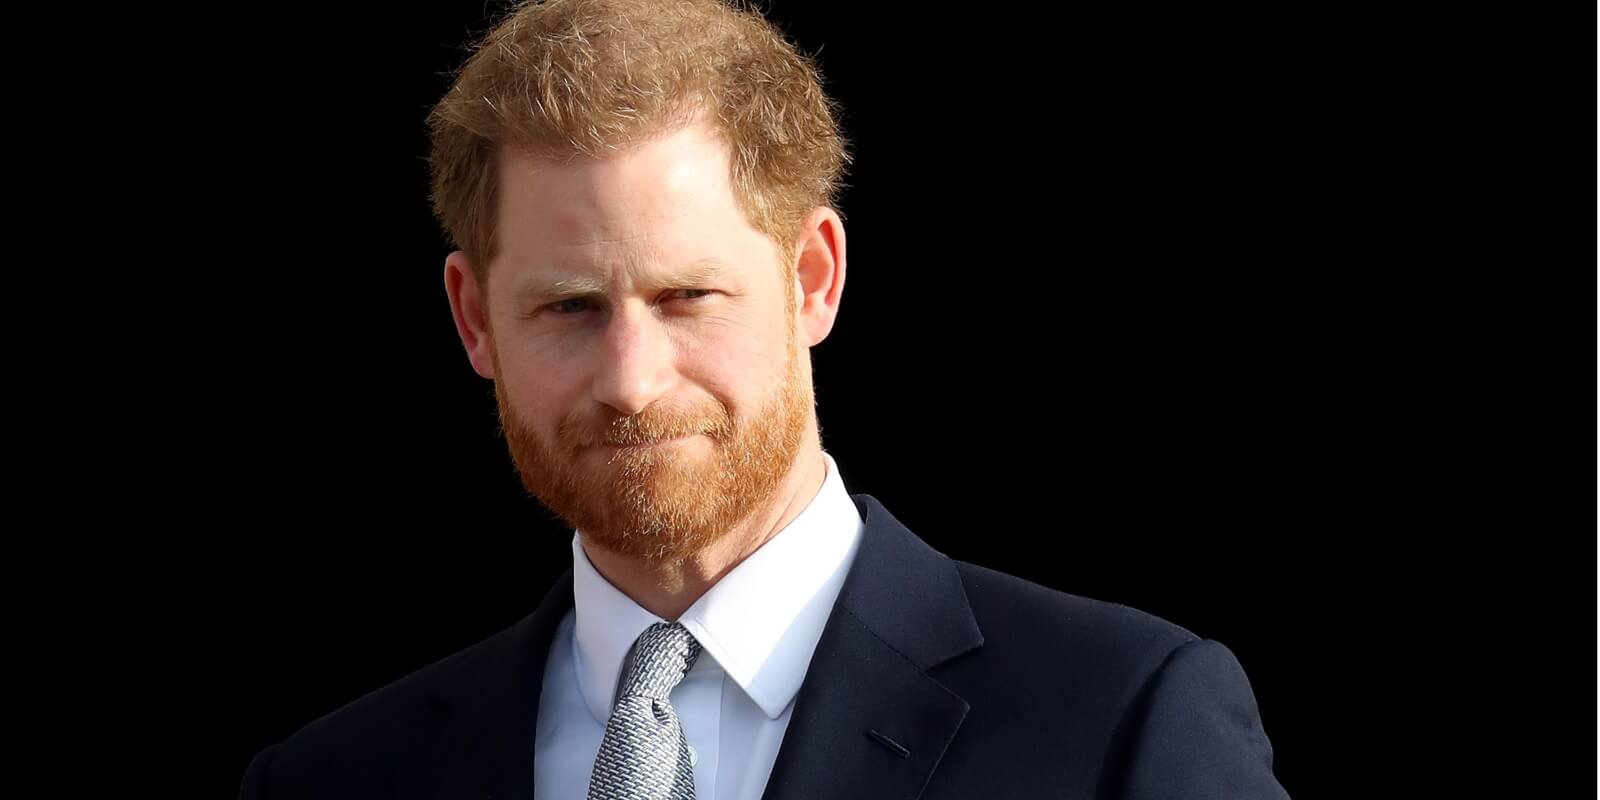 Prince Harry photographed at Buckingham Palace on January 16, 2020 in London, England.